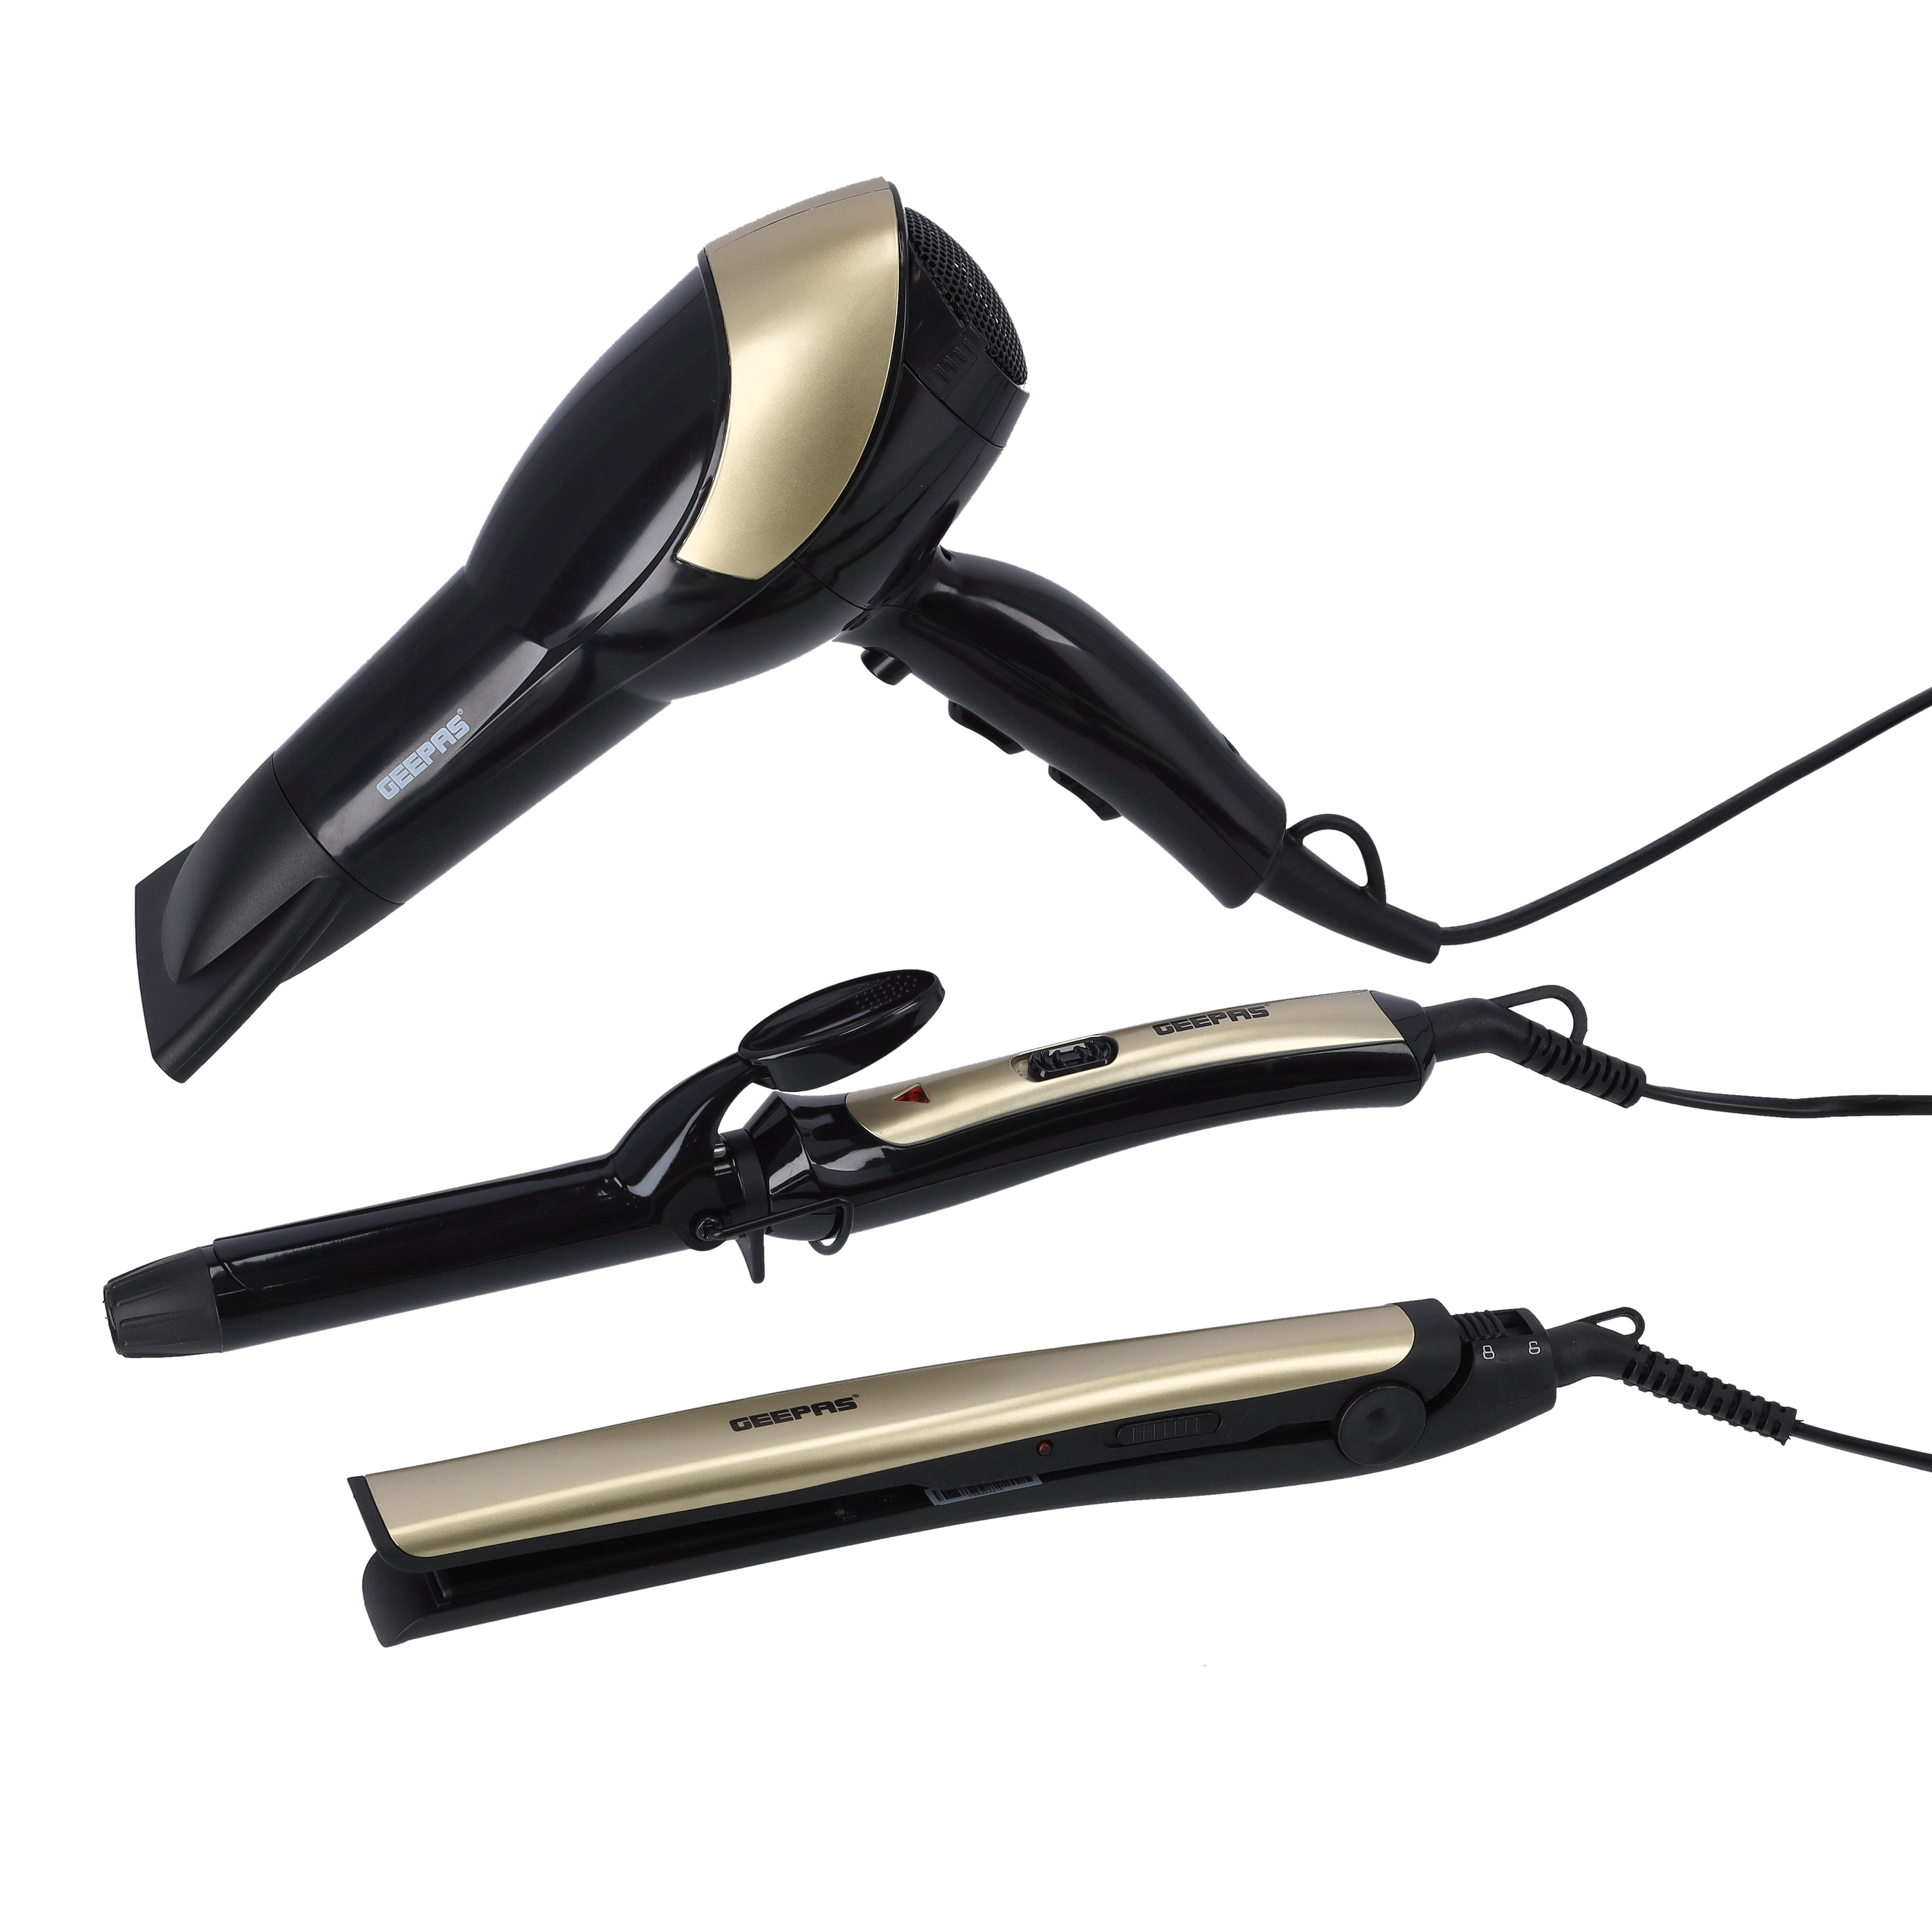 Geepas 3 In 1 Hair Styling Set 2200W - 2 Speed & 3 Heat Setting Curler |  Ceramic Coating Plates Straightener with 25mm Hair Curler | Ideal Gift for  Women | Perfect for Short & Long Hairs